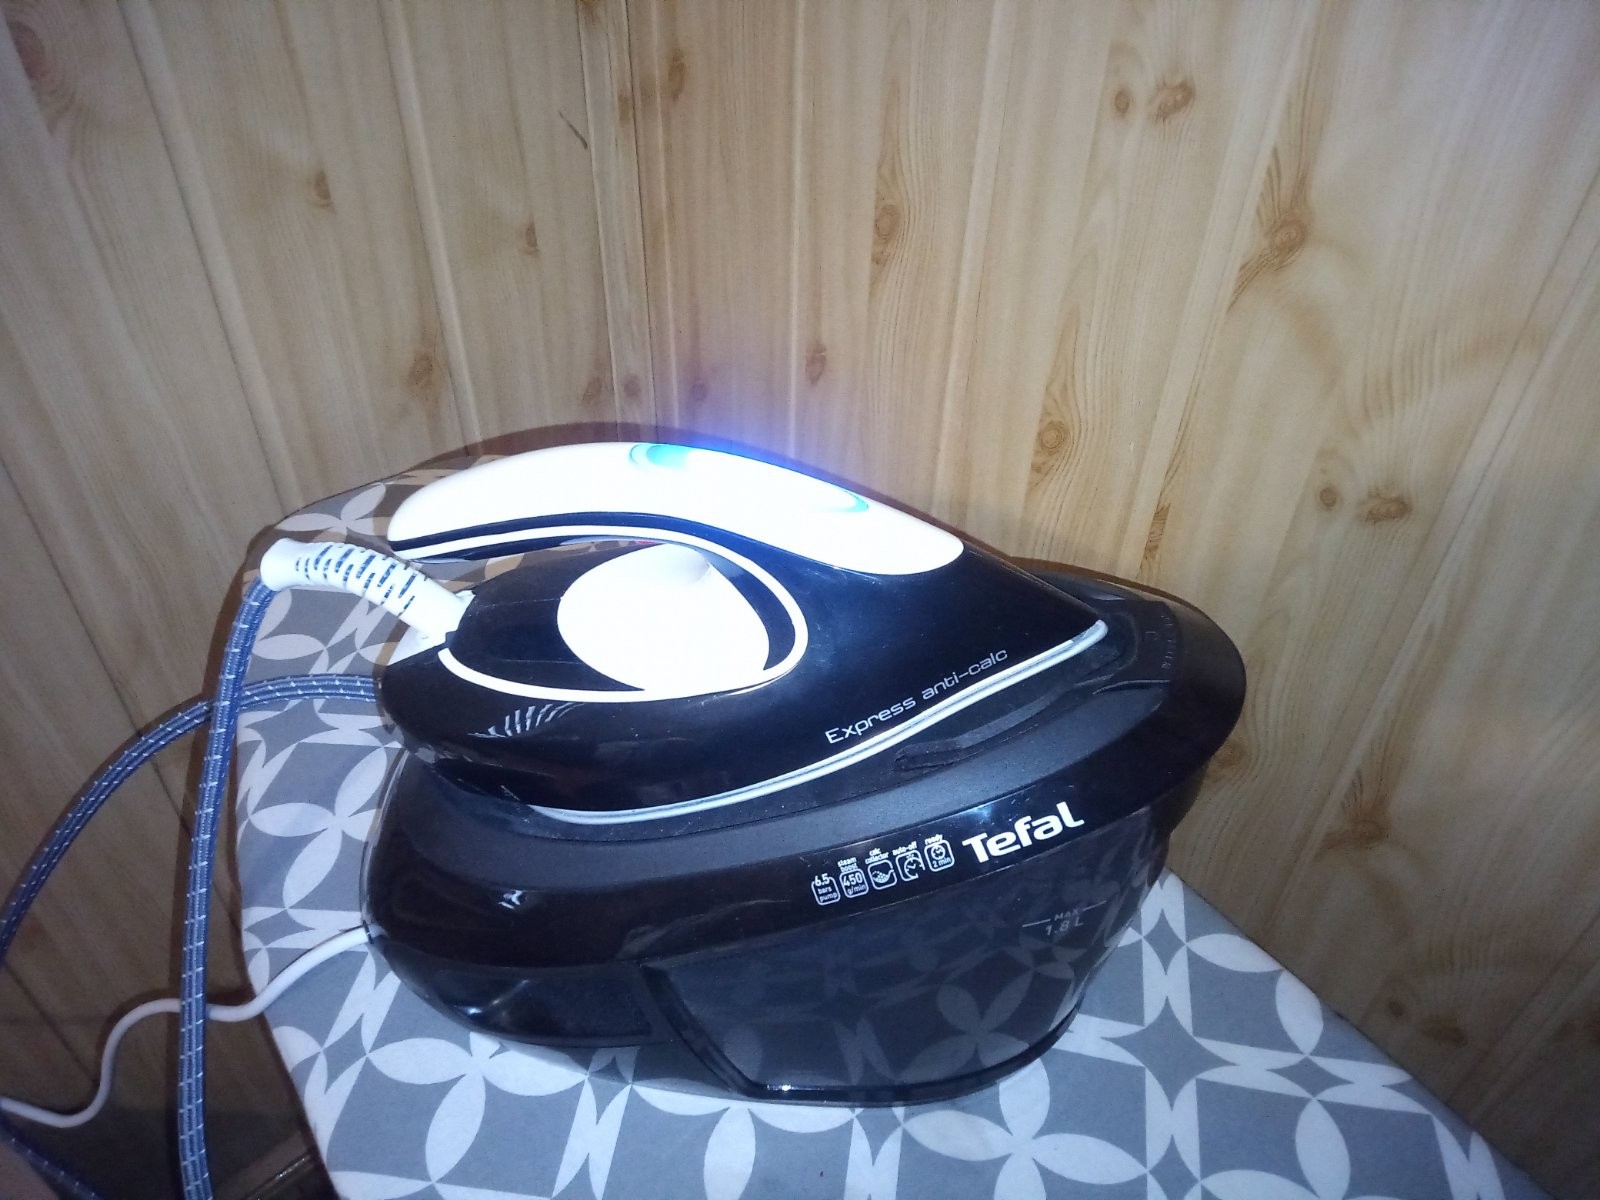 reviews, Tefal - iron Dnepropetrovsk, prices, > Ukraine: Odessa SV Lviv, specifications generator: steam with (SV8055E0) Kyiv, stores buy price Express in 8055